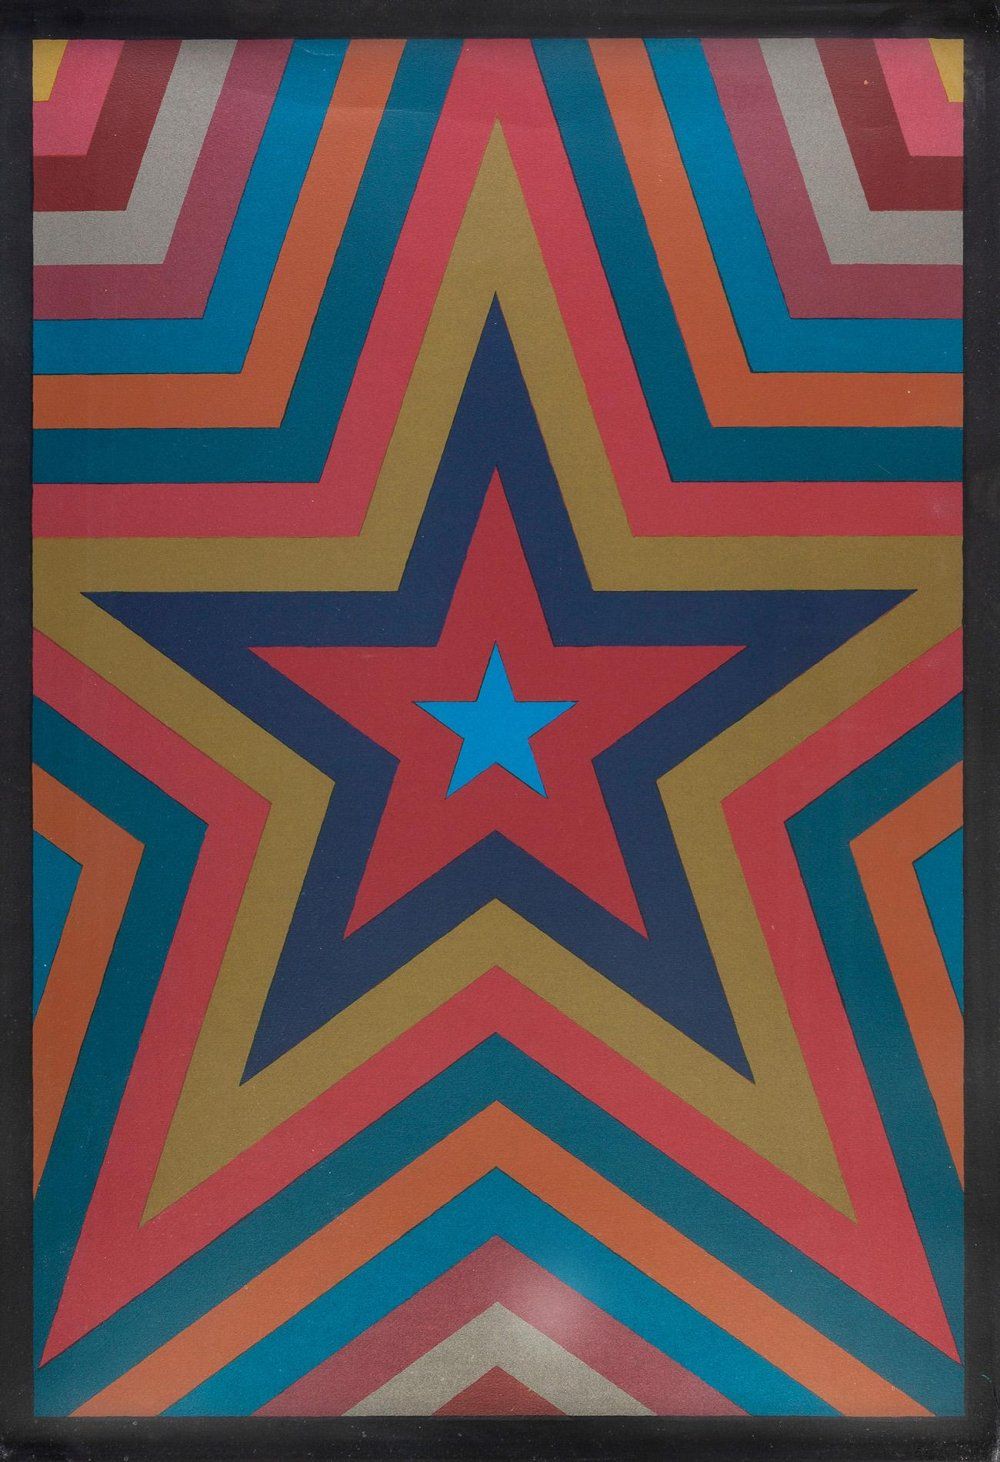 Null SOL LEWITT (United States, 1928 - 2007).
"Five pointed star with colorbands&hellip;